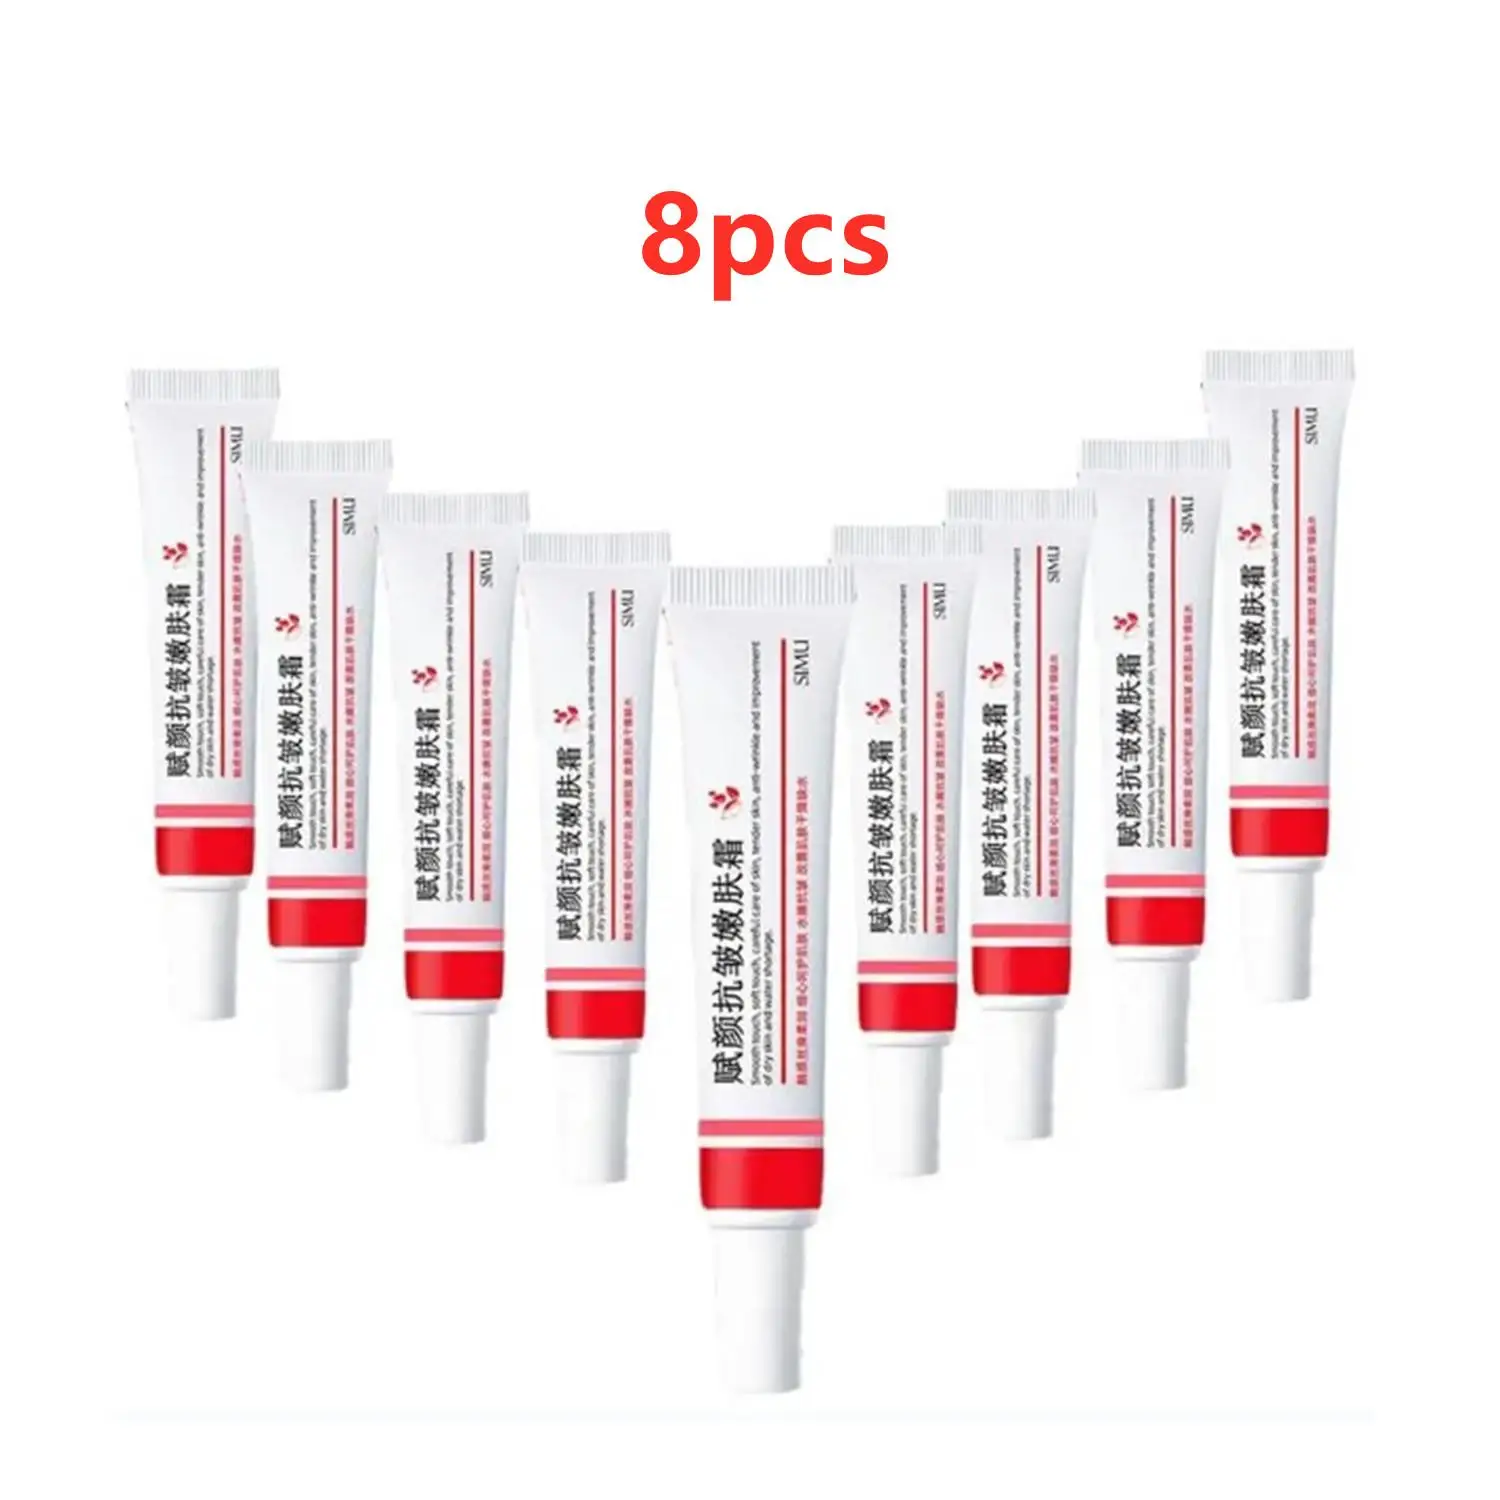 8PCS Retinol Firming Face Cream Remove Wrinkle Anti-Aging Fade Fine Lines Acne Treatment Shrink Pores Creams Beauty Skin Care 4 8pcs washing machine cleaner effervescent tablets deep cleaning washer deodorant remove stains detergent for washing machine